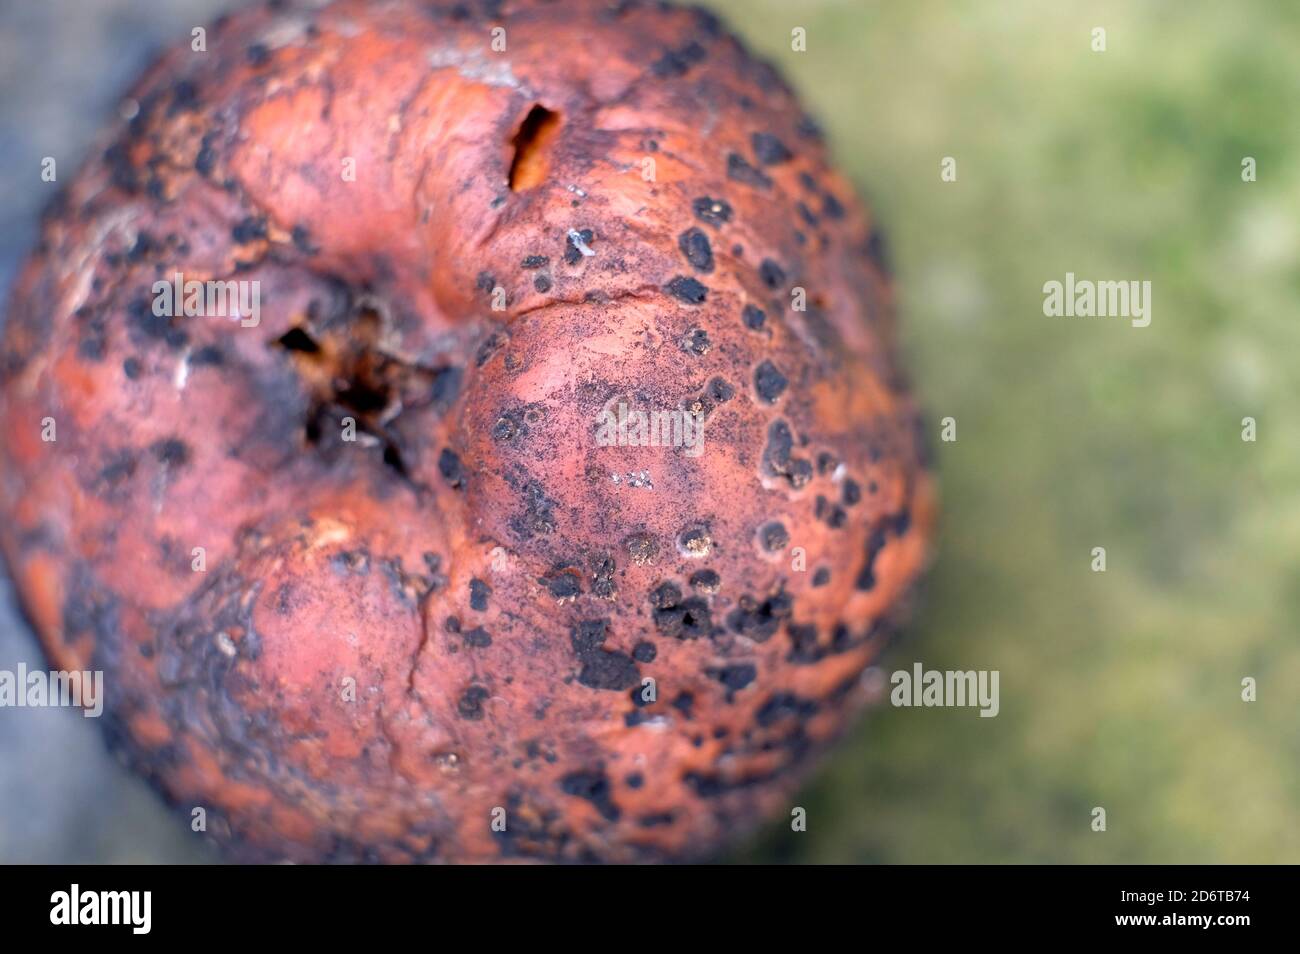 close up of brown rotting apple skin Stock Photo